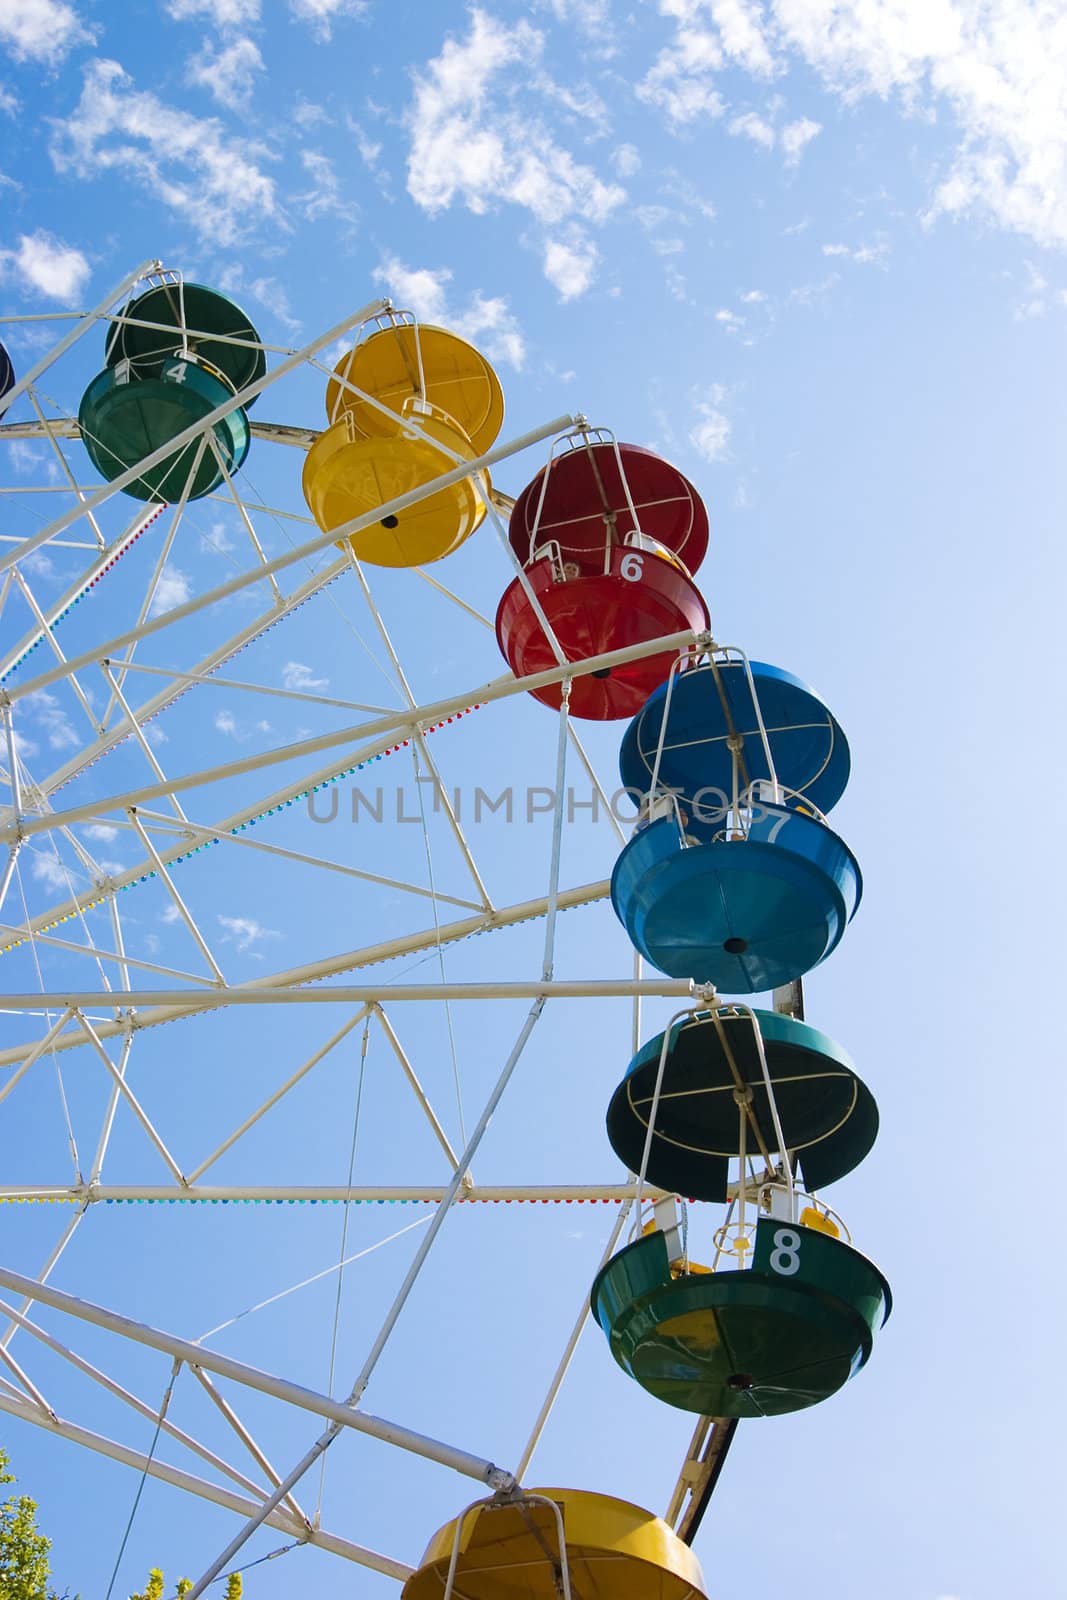 Popular attraction in park - a Ferris wheel on a background of the cloudy blue sky